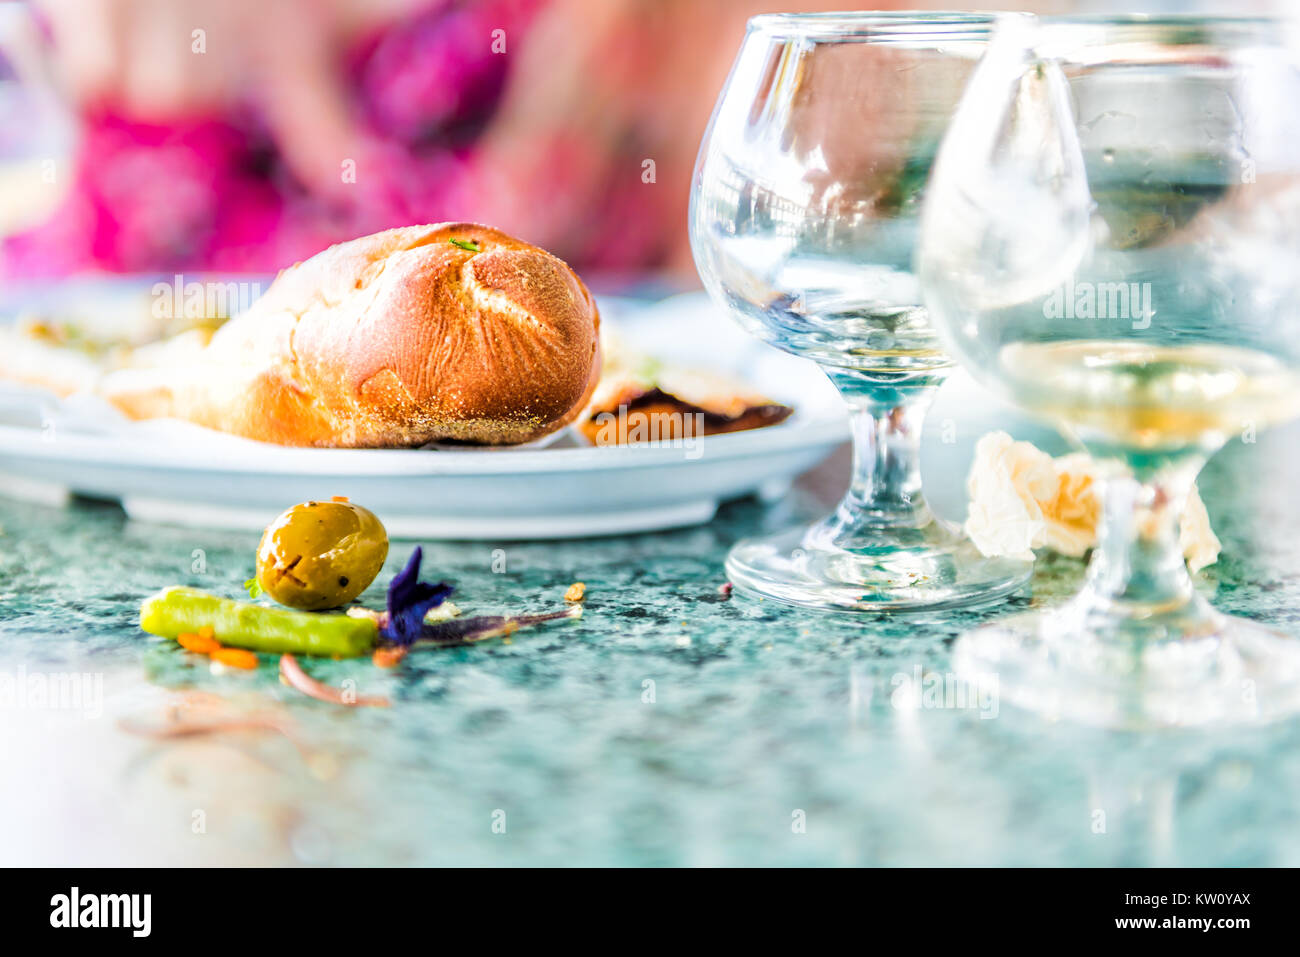 Closeup of leftovers in restaurant on table with small glass cognac whiskey rum glasses and messy dirty surface, bread Stock Photo